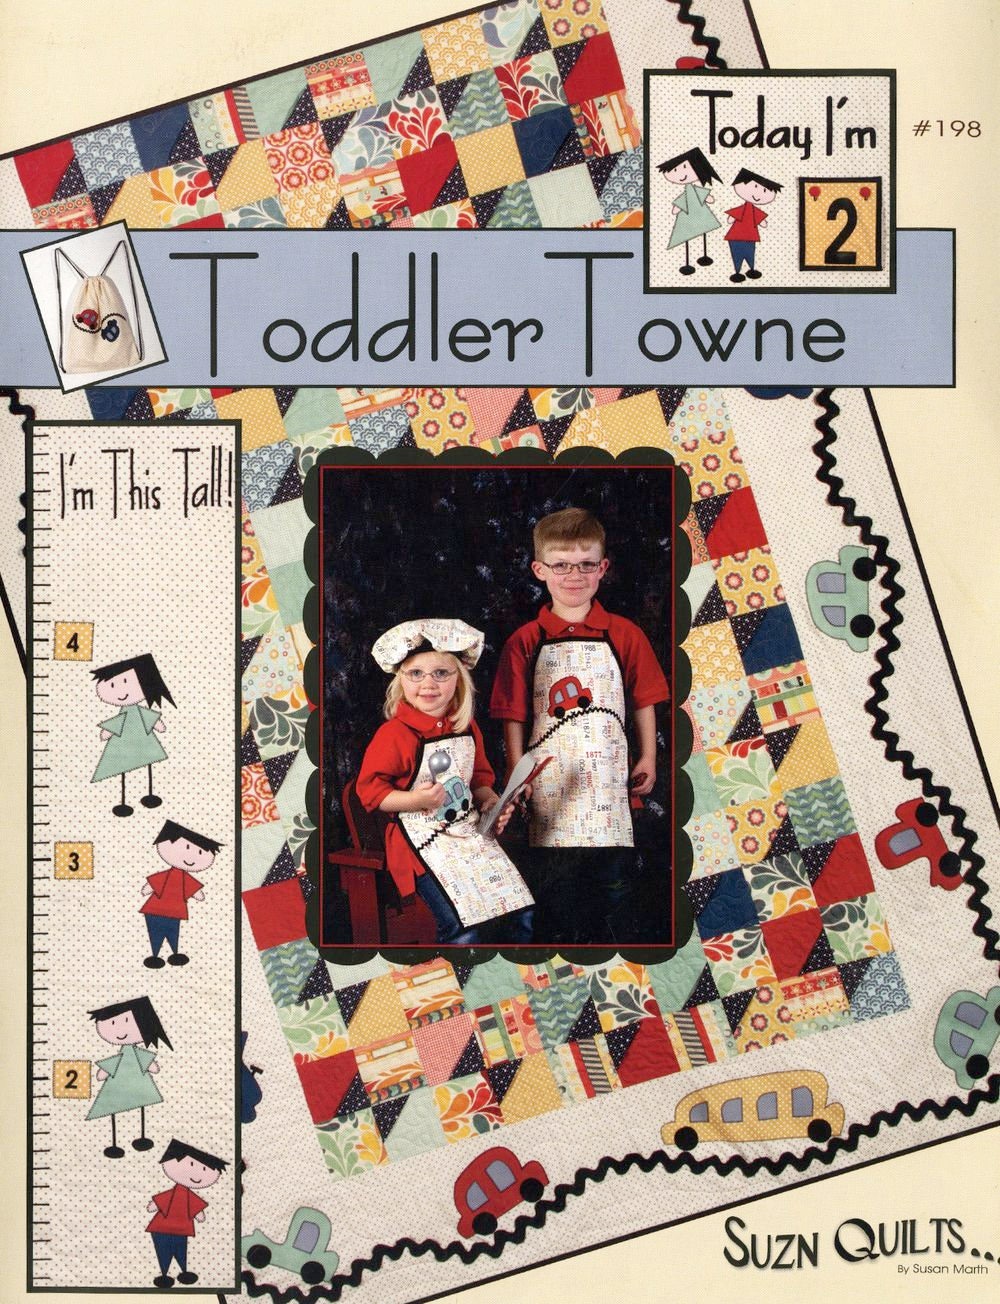 Toddler Towne Quilt Pattern Book by Susan Marth for Suzn Quilts